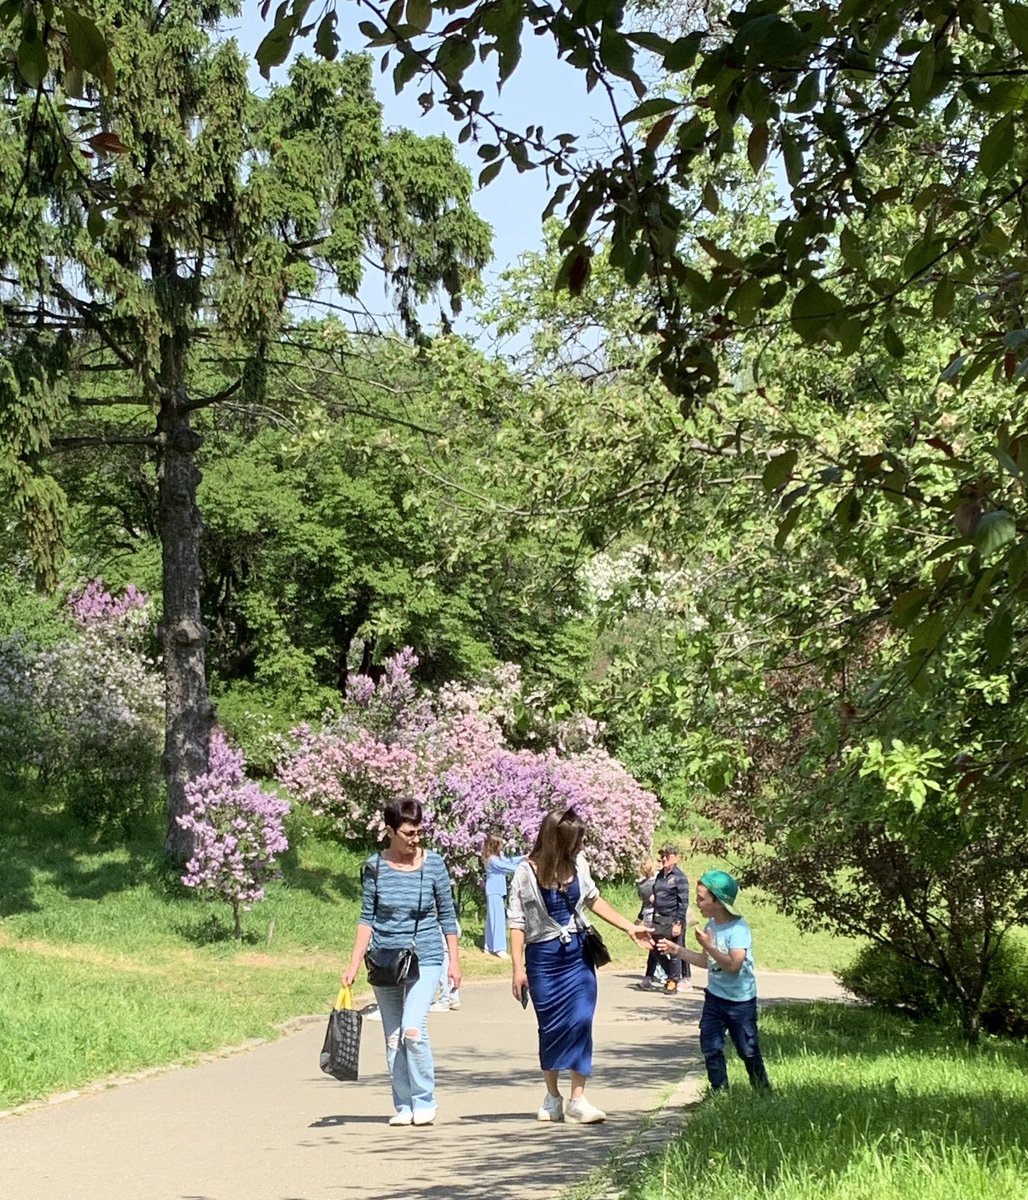 May is my favourite month in Kyiv. I visited the Hryshko Botanical Gardens today, where the lilacs are in full bloom. This is the third year since Russia’s full-scale invasion that they have blossomed in a sovereign, independent Ukraine. They will for centuries to come.